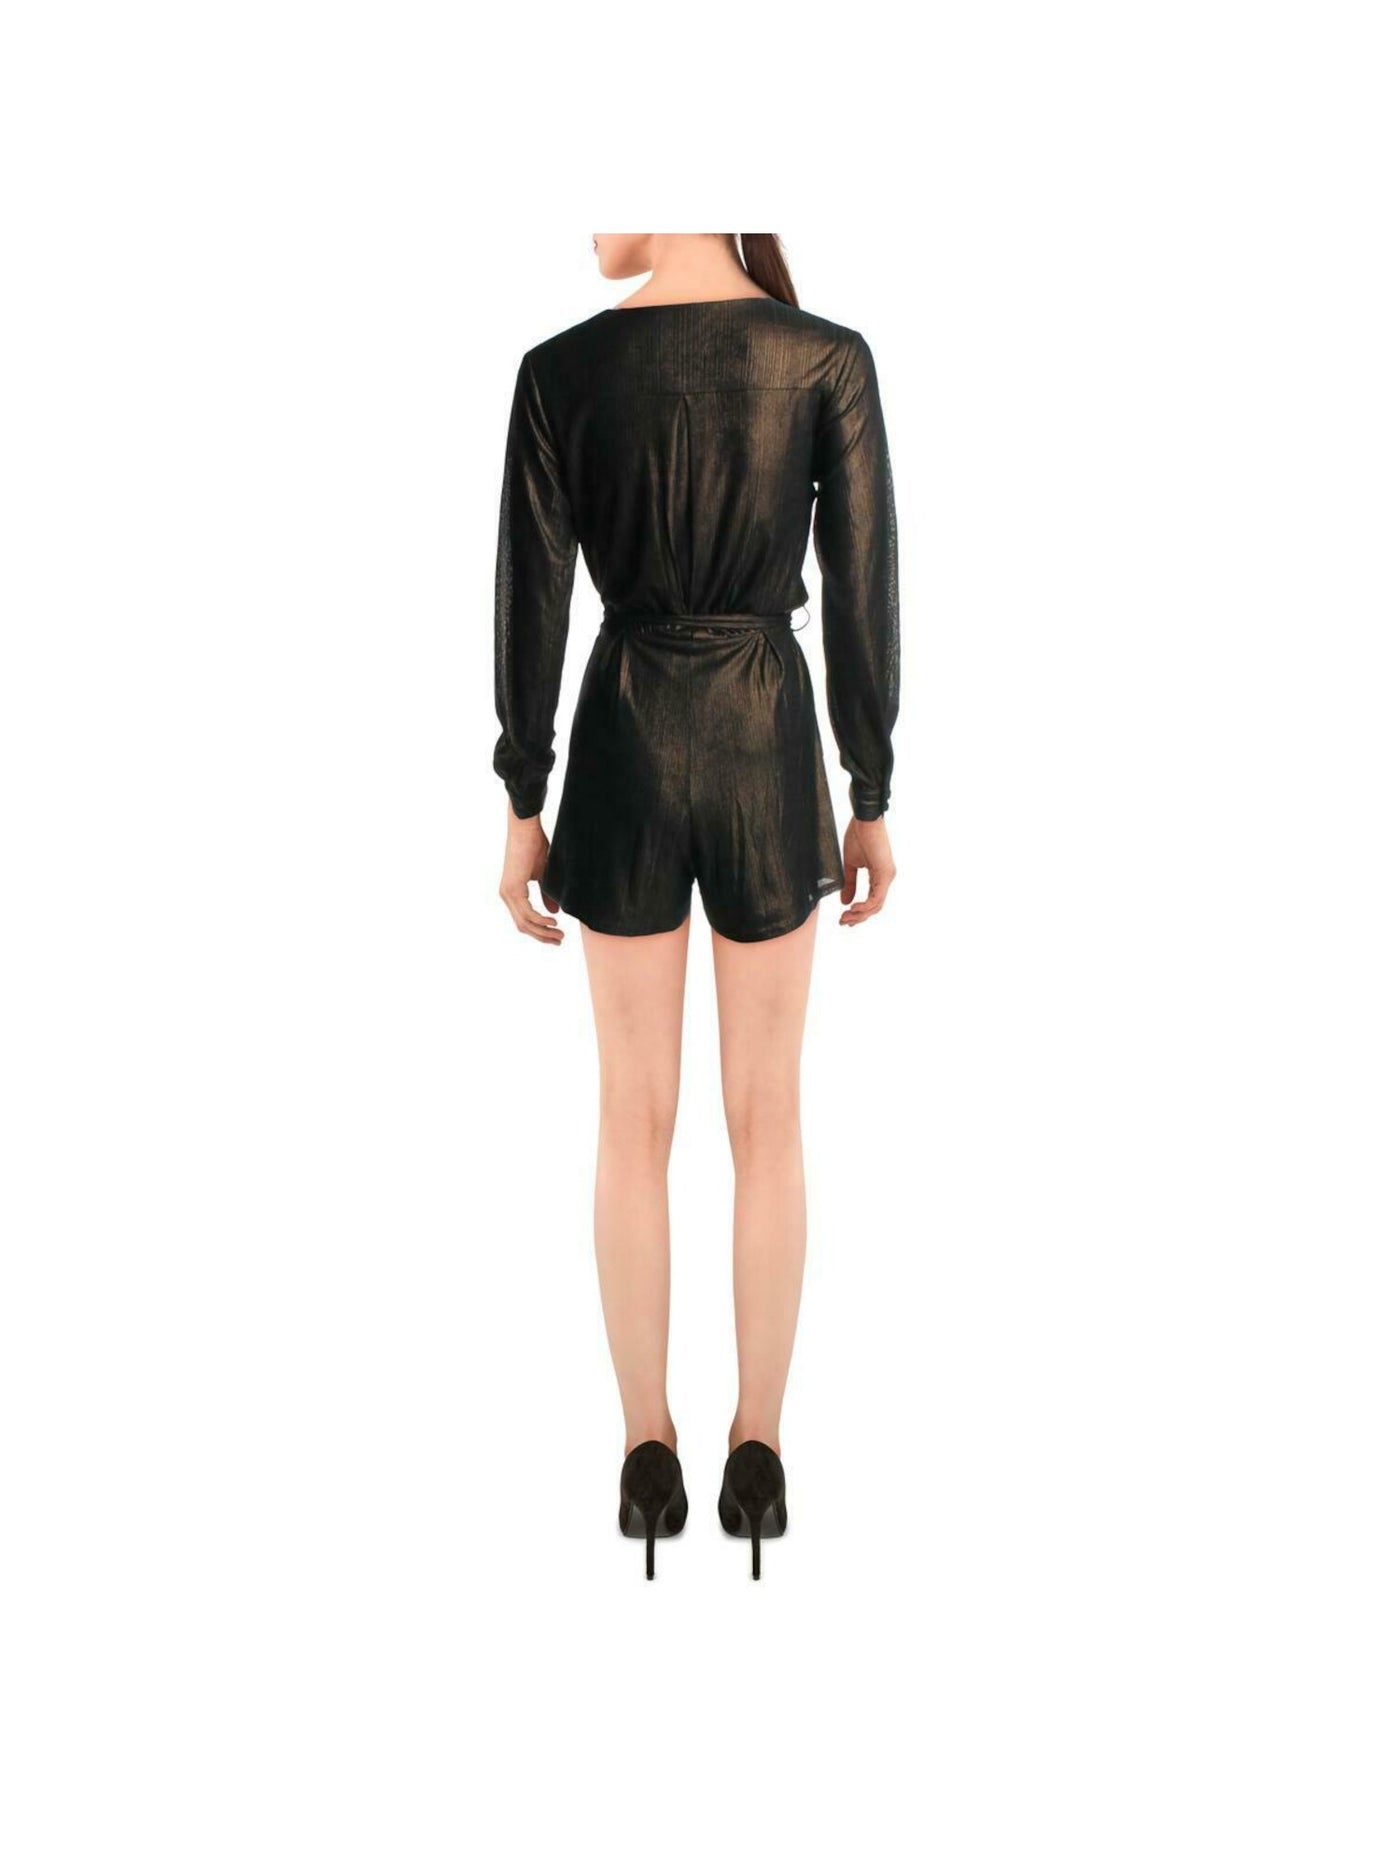 ALI + JAY Womens Gold Textured Belted Long Sleeve V Neck Party Romper Size: S